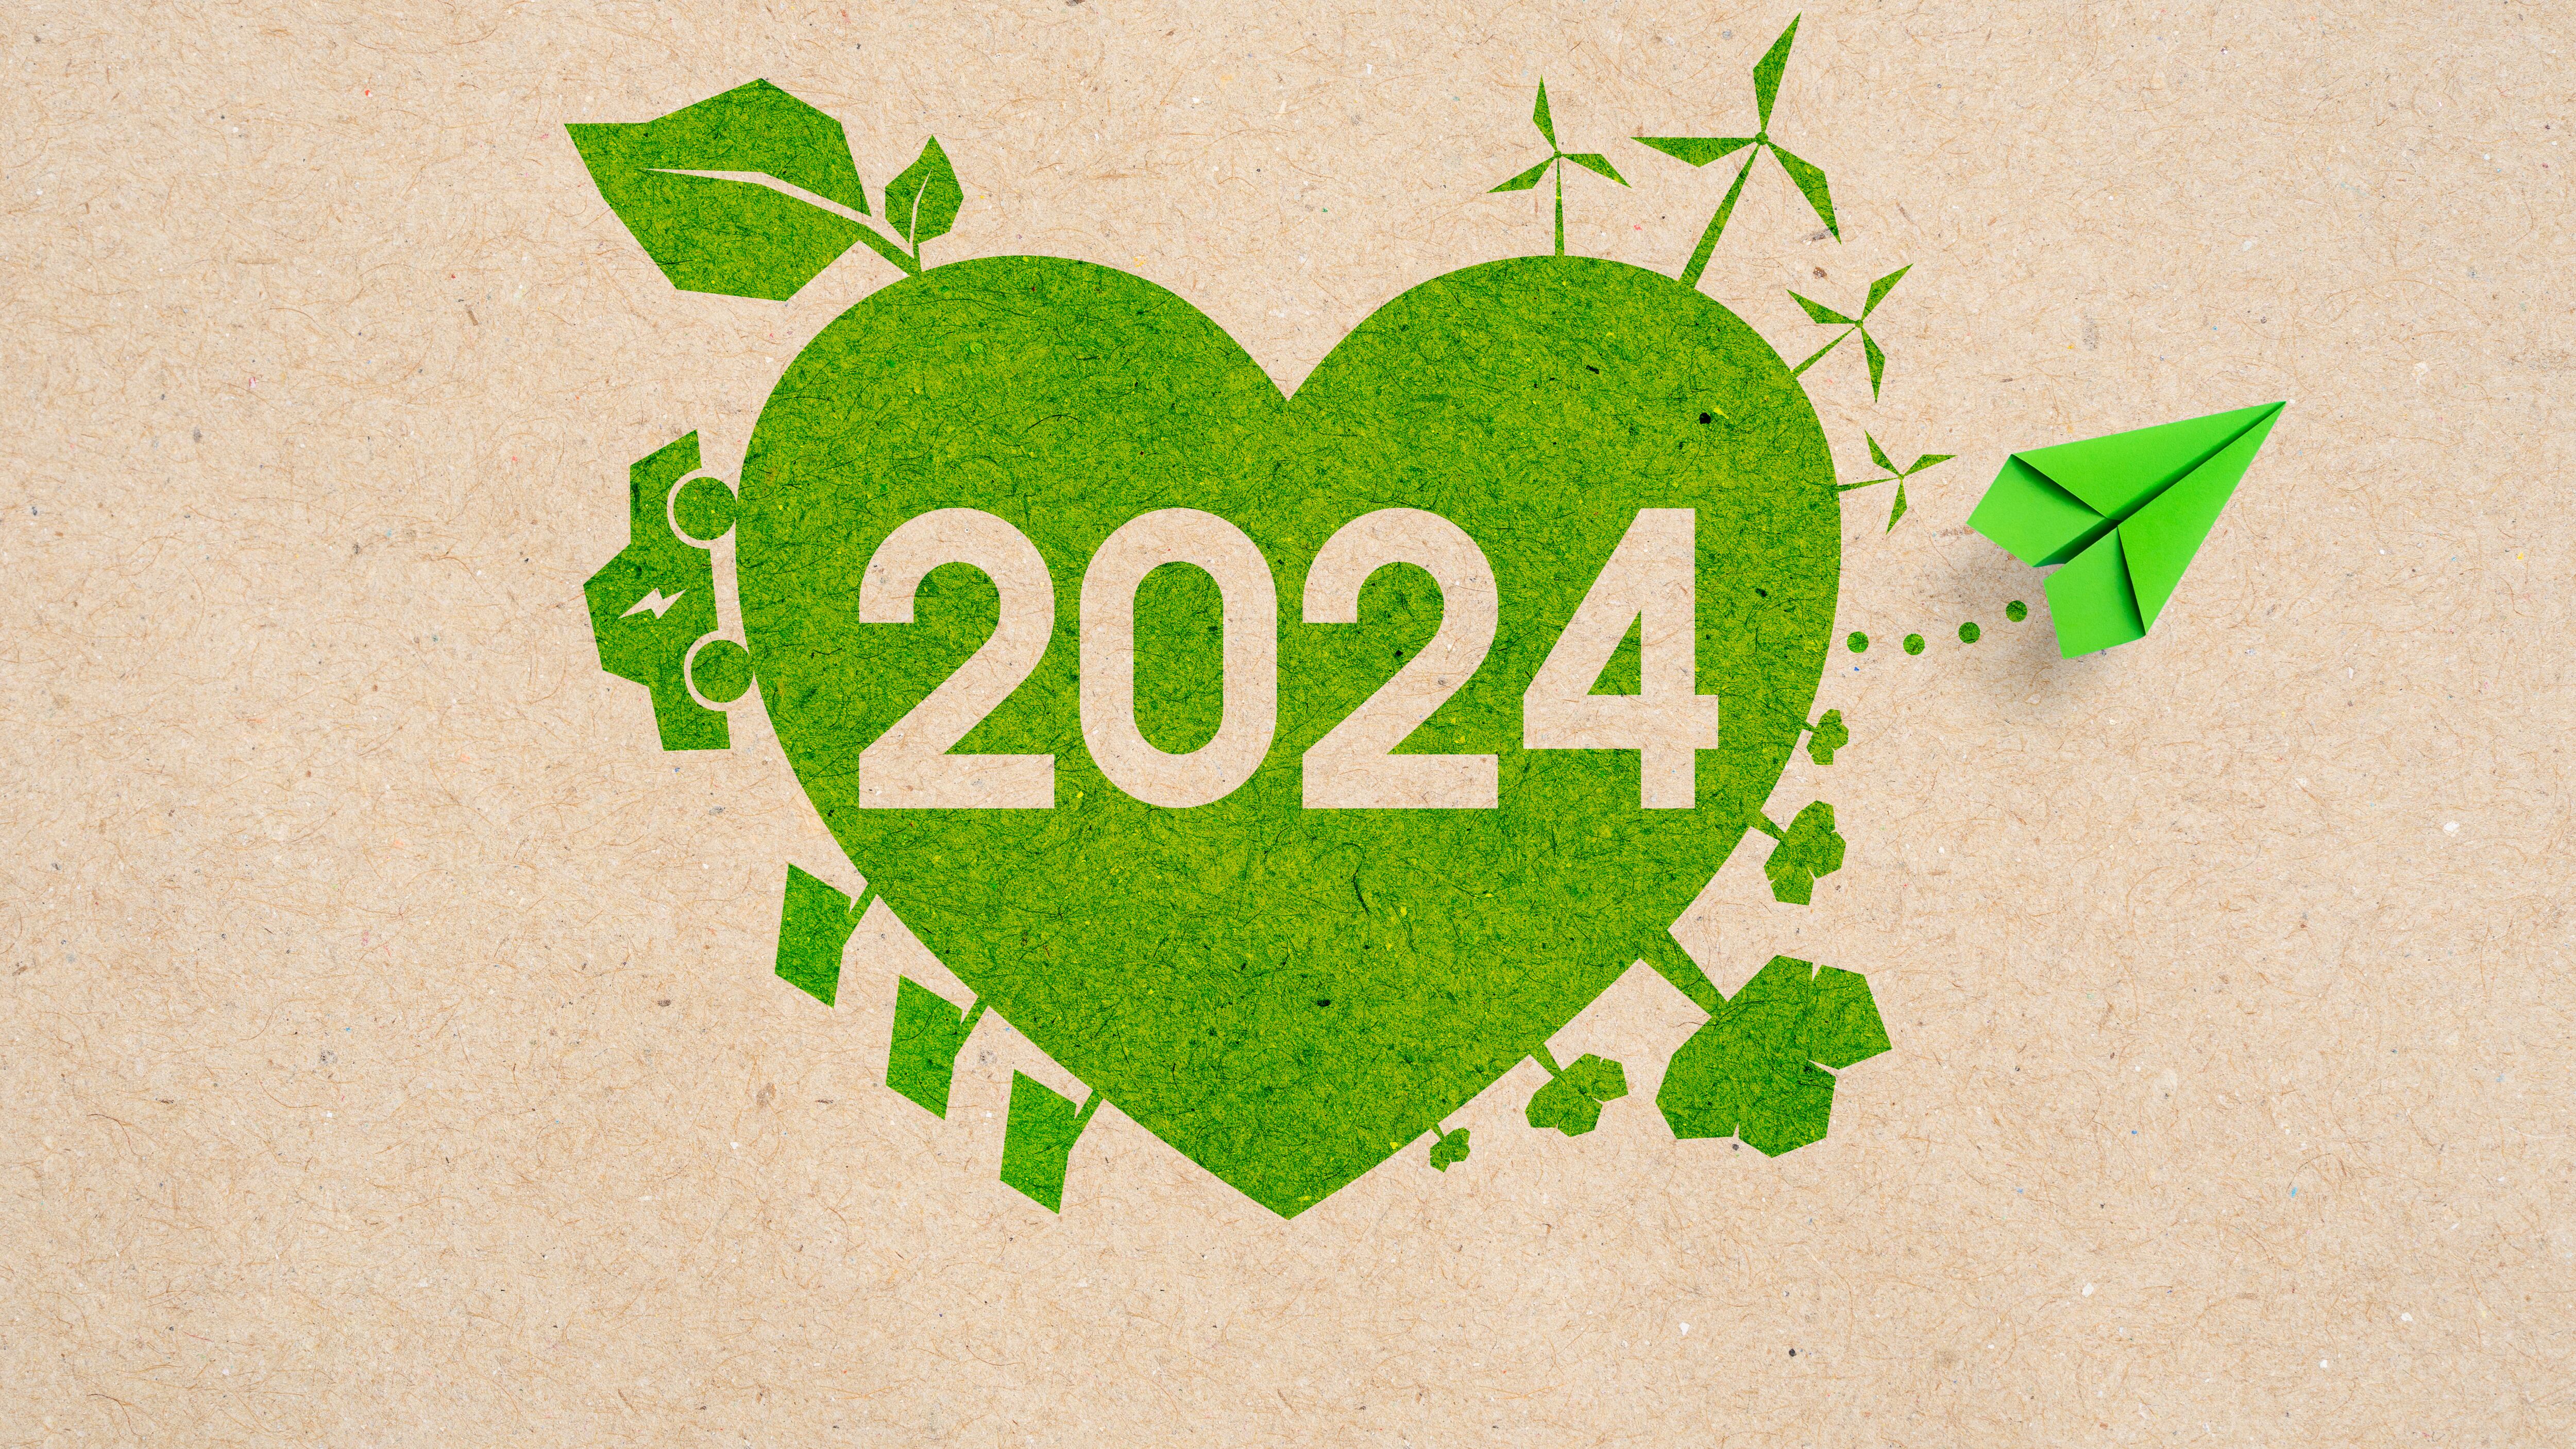 Green paper plane and green heart 2024, eco-friendly environmental concept